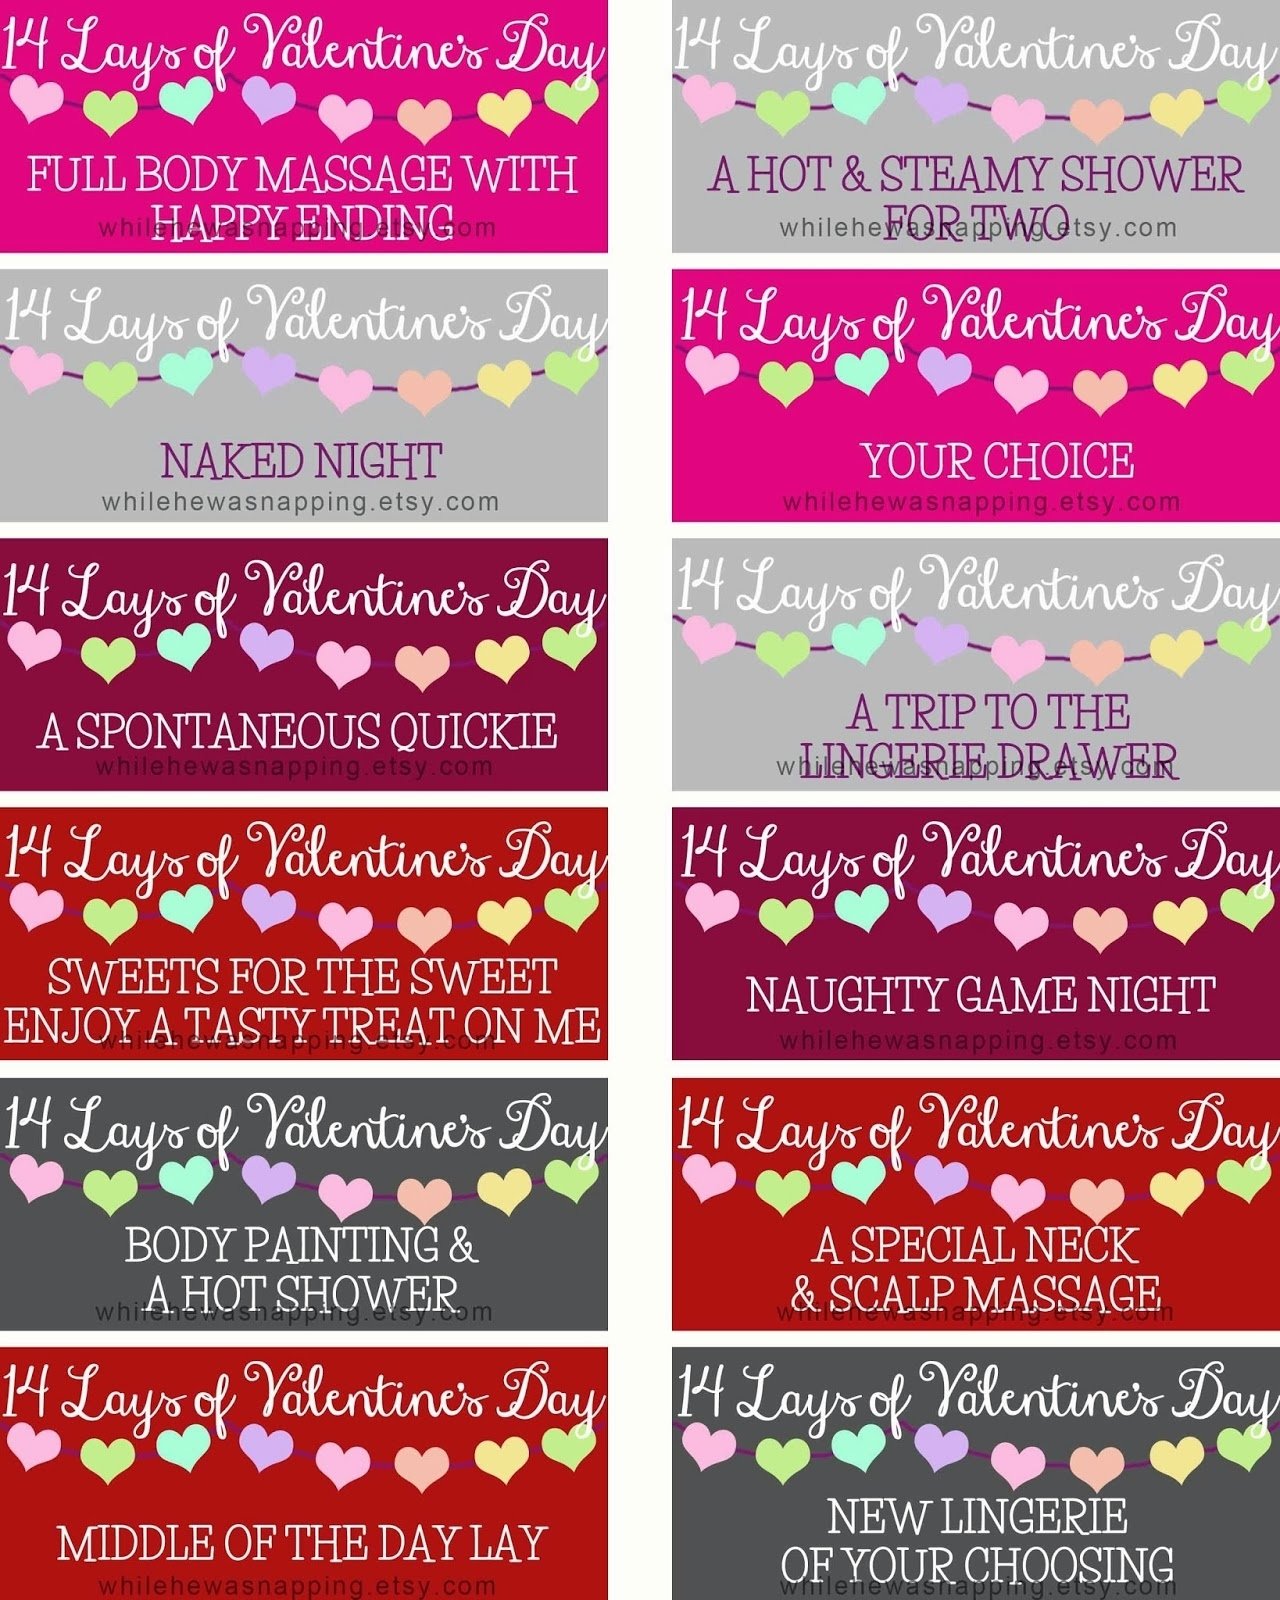 10-perfect-love-coupon-ideas-for-husband-2024